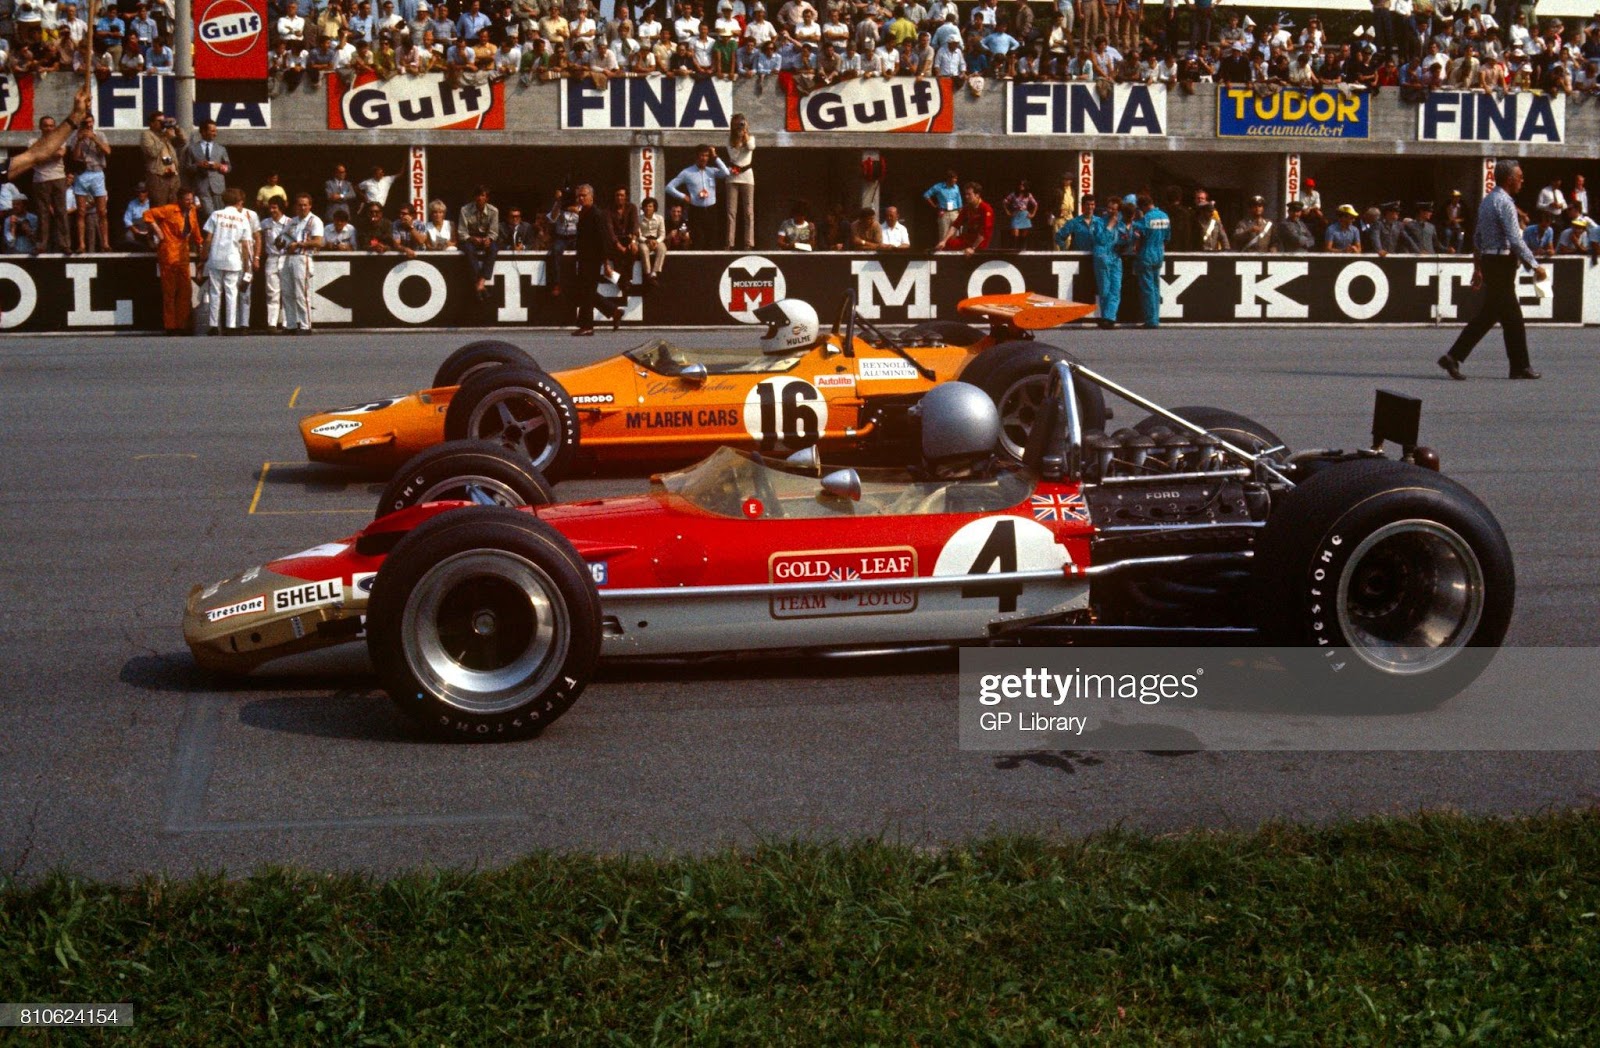 Jochen Rindt in a Lotus 49B and 2nd Denny Hulme in a McLaren M7A at the 1969 Italian Grand Prix in Monza. 